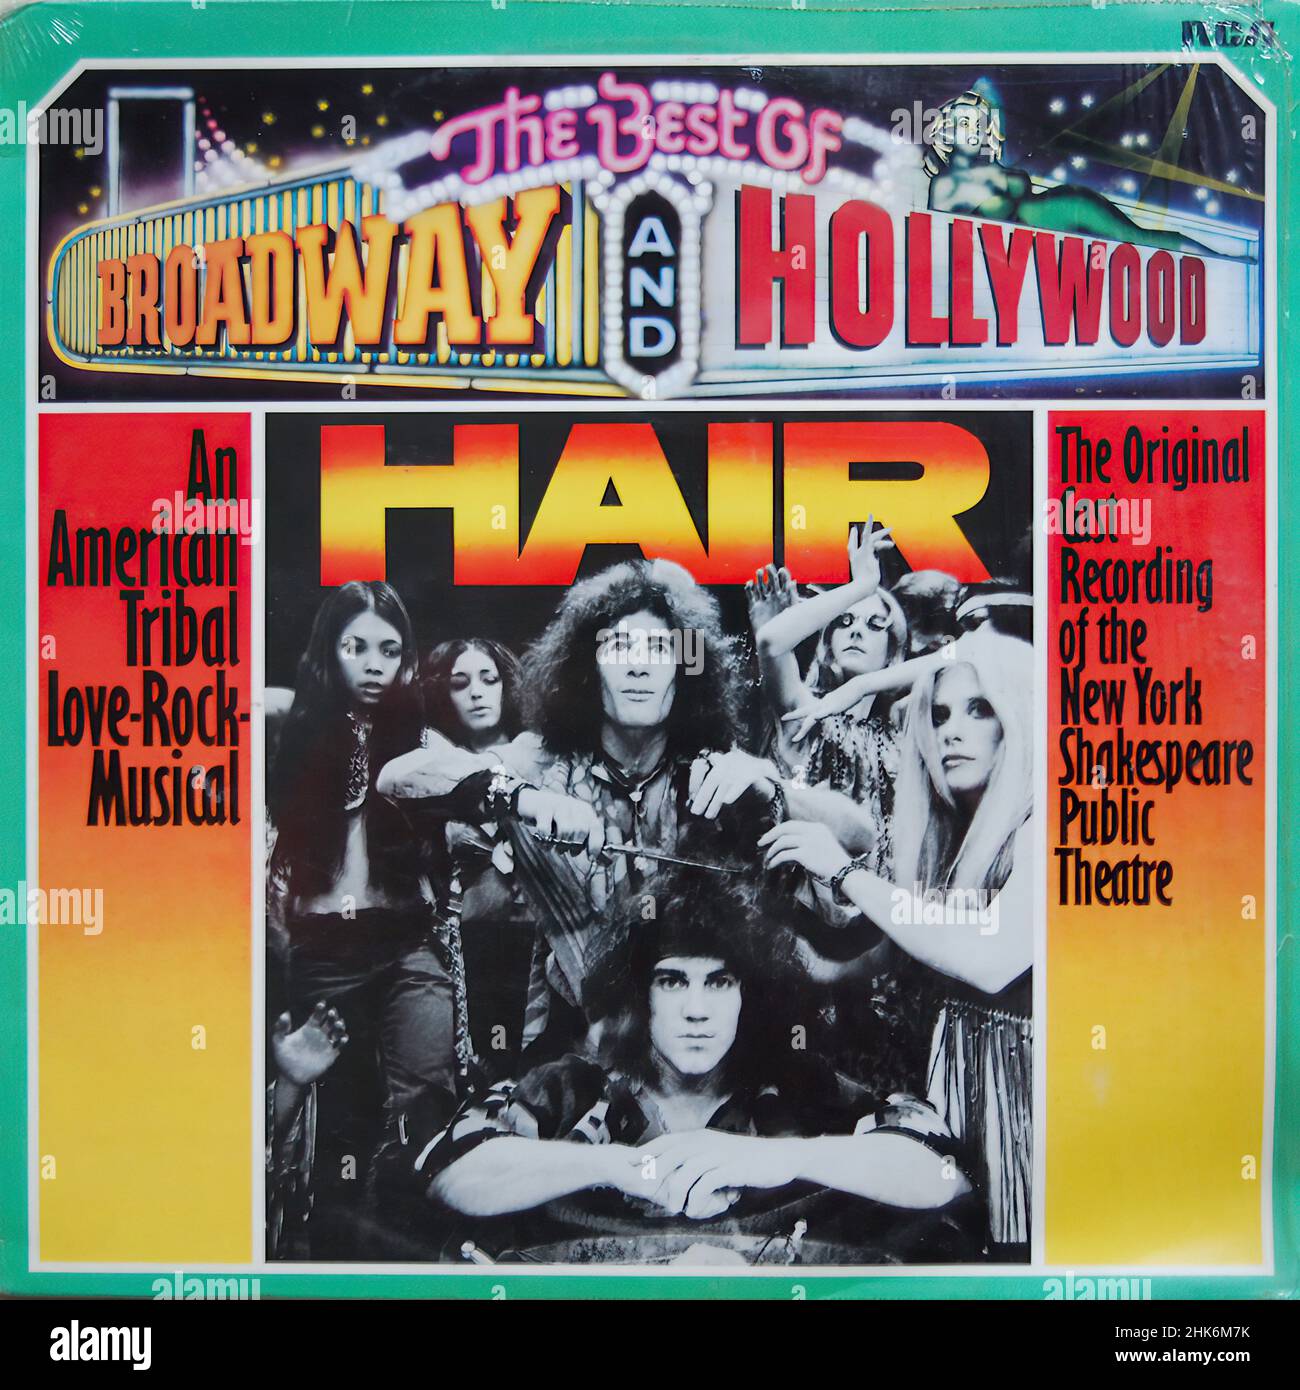 Vintage vinyl record cover -  Hair - Musical - Best of Broadway and Hollywood (Original Cast Recording Of The New York Shakespeare Public Theatre) Stock Photo